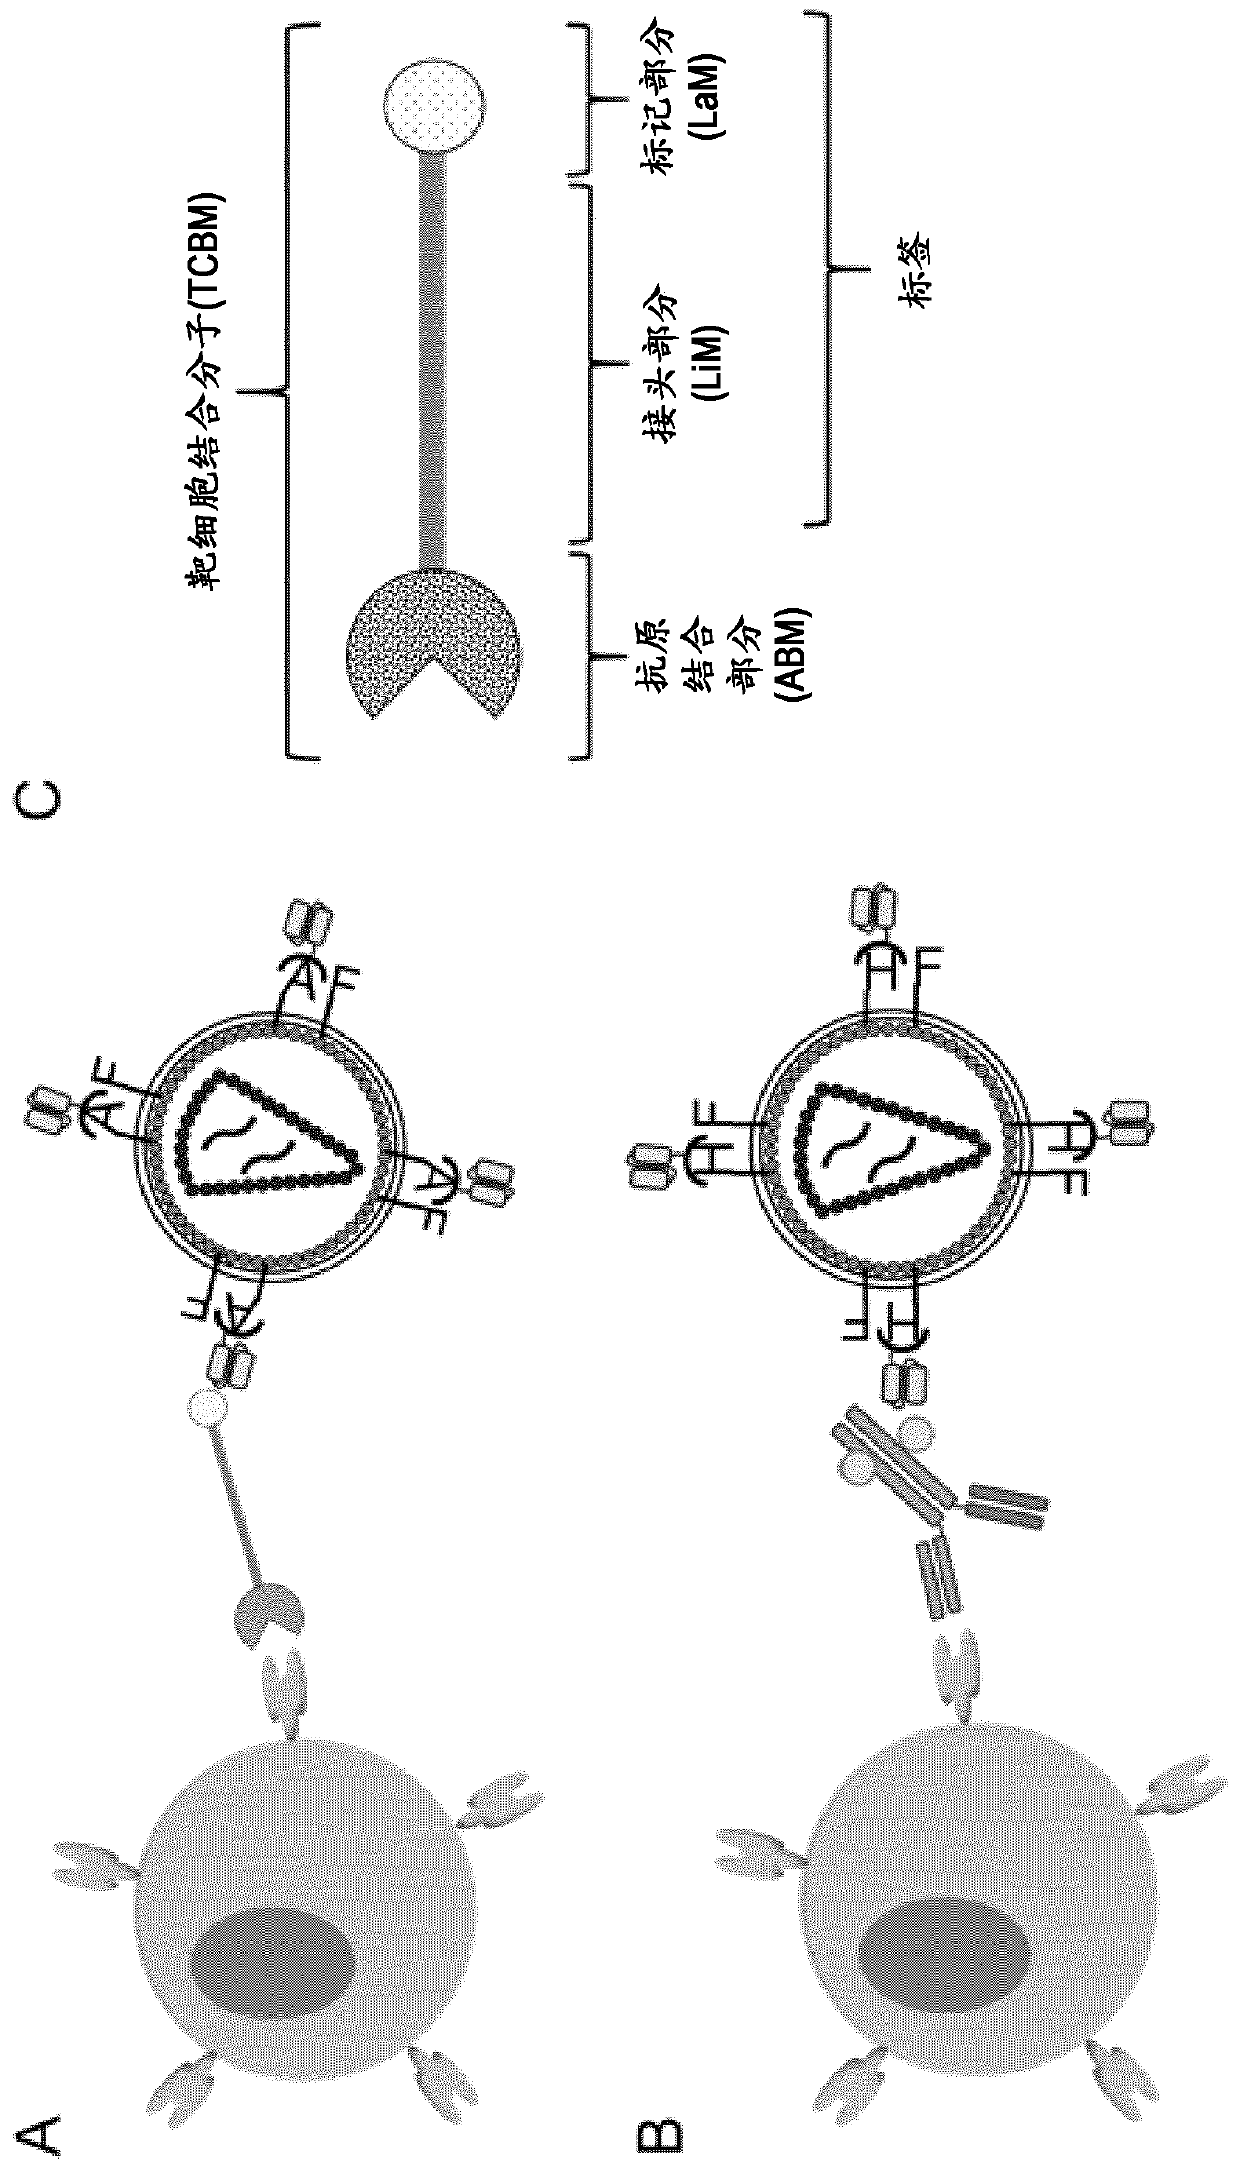 Adapter-based retroviral vector system for the selective transduction of target cells